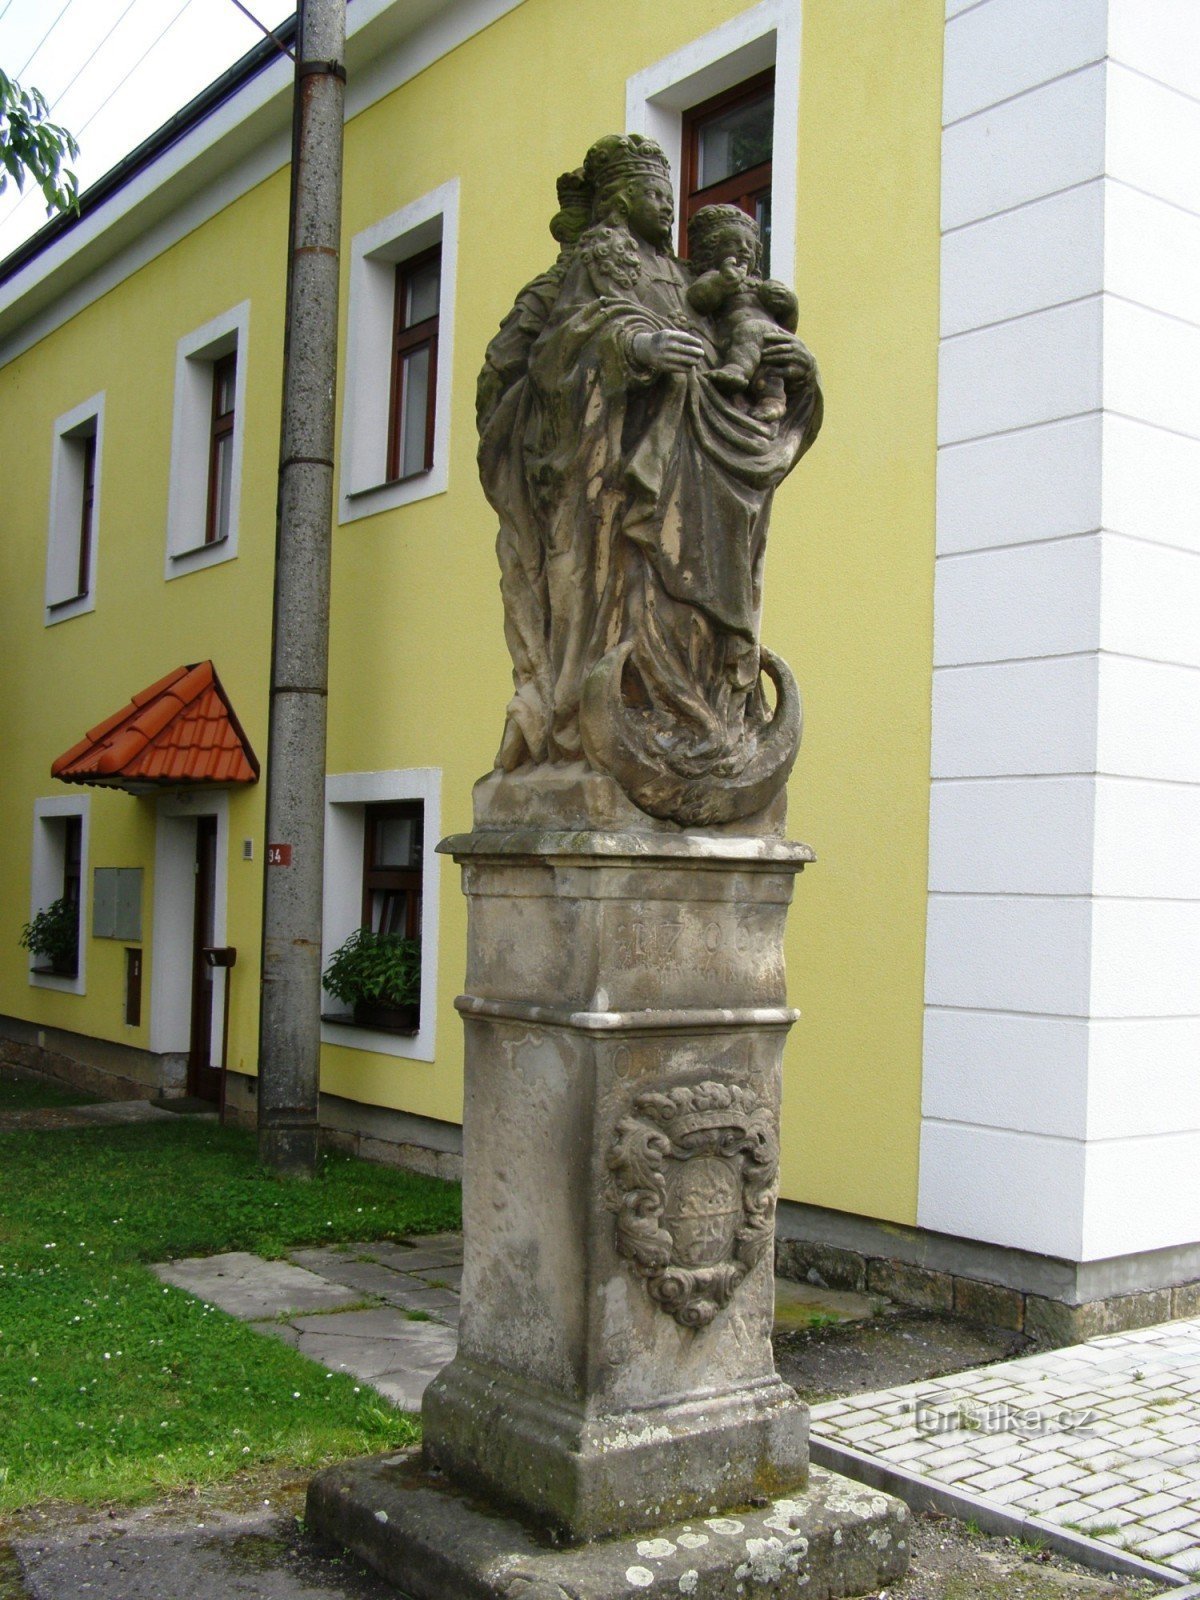 Hlušice - double statues of St. Virgin Mary and St. Barbara